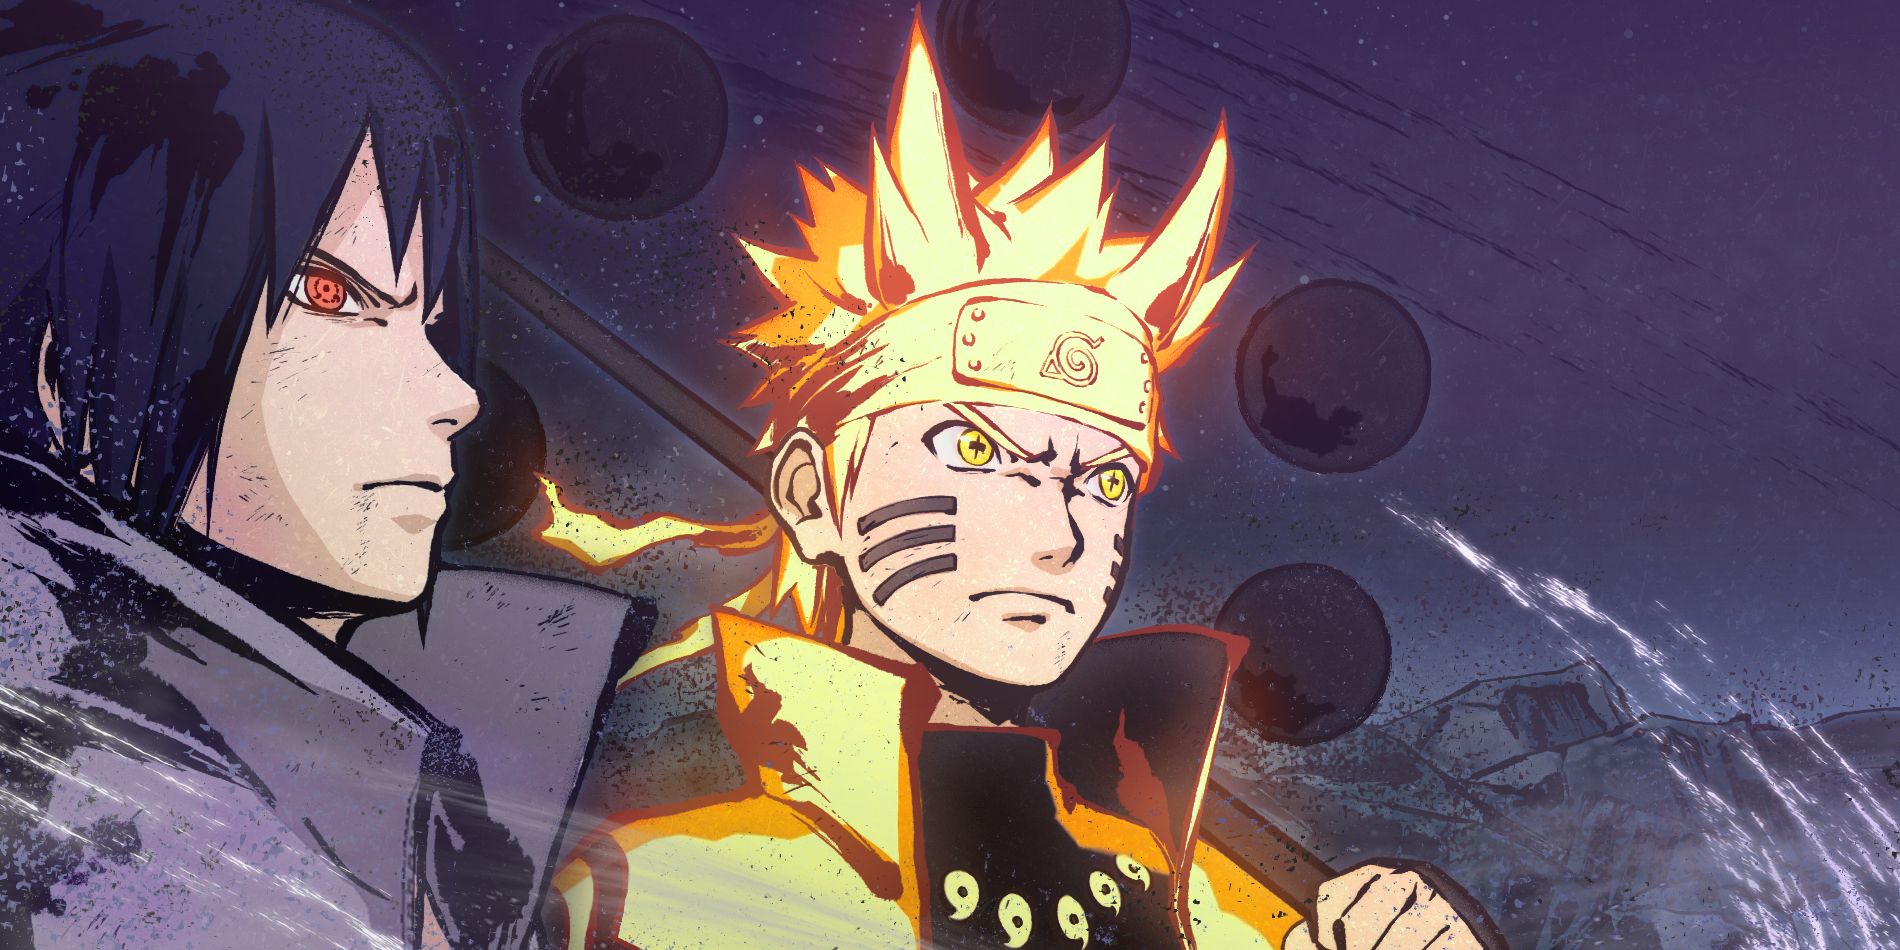 Artwork from Naruto Ninja Storm 4 game shows Naruto in his Sage of Six paths mode standing next to Sasuke as they look ahead to their next battle to save the world.